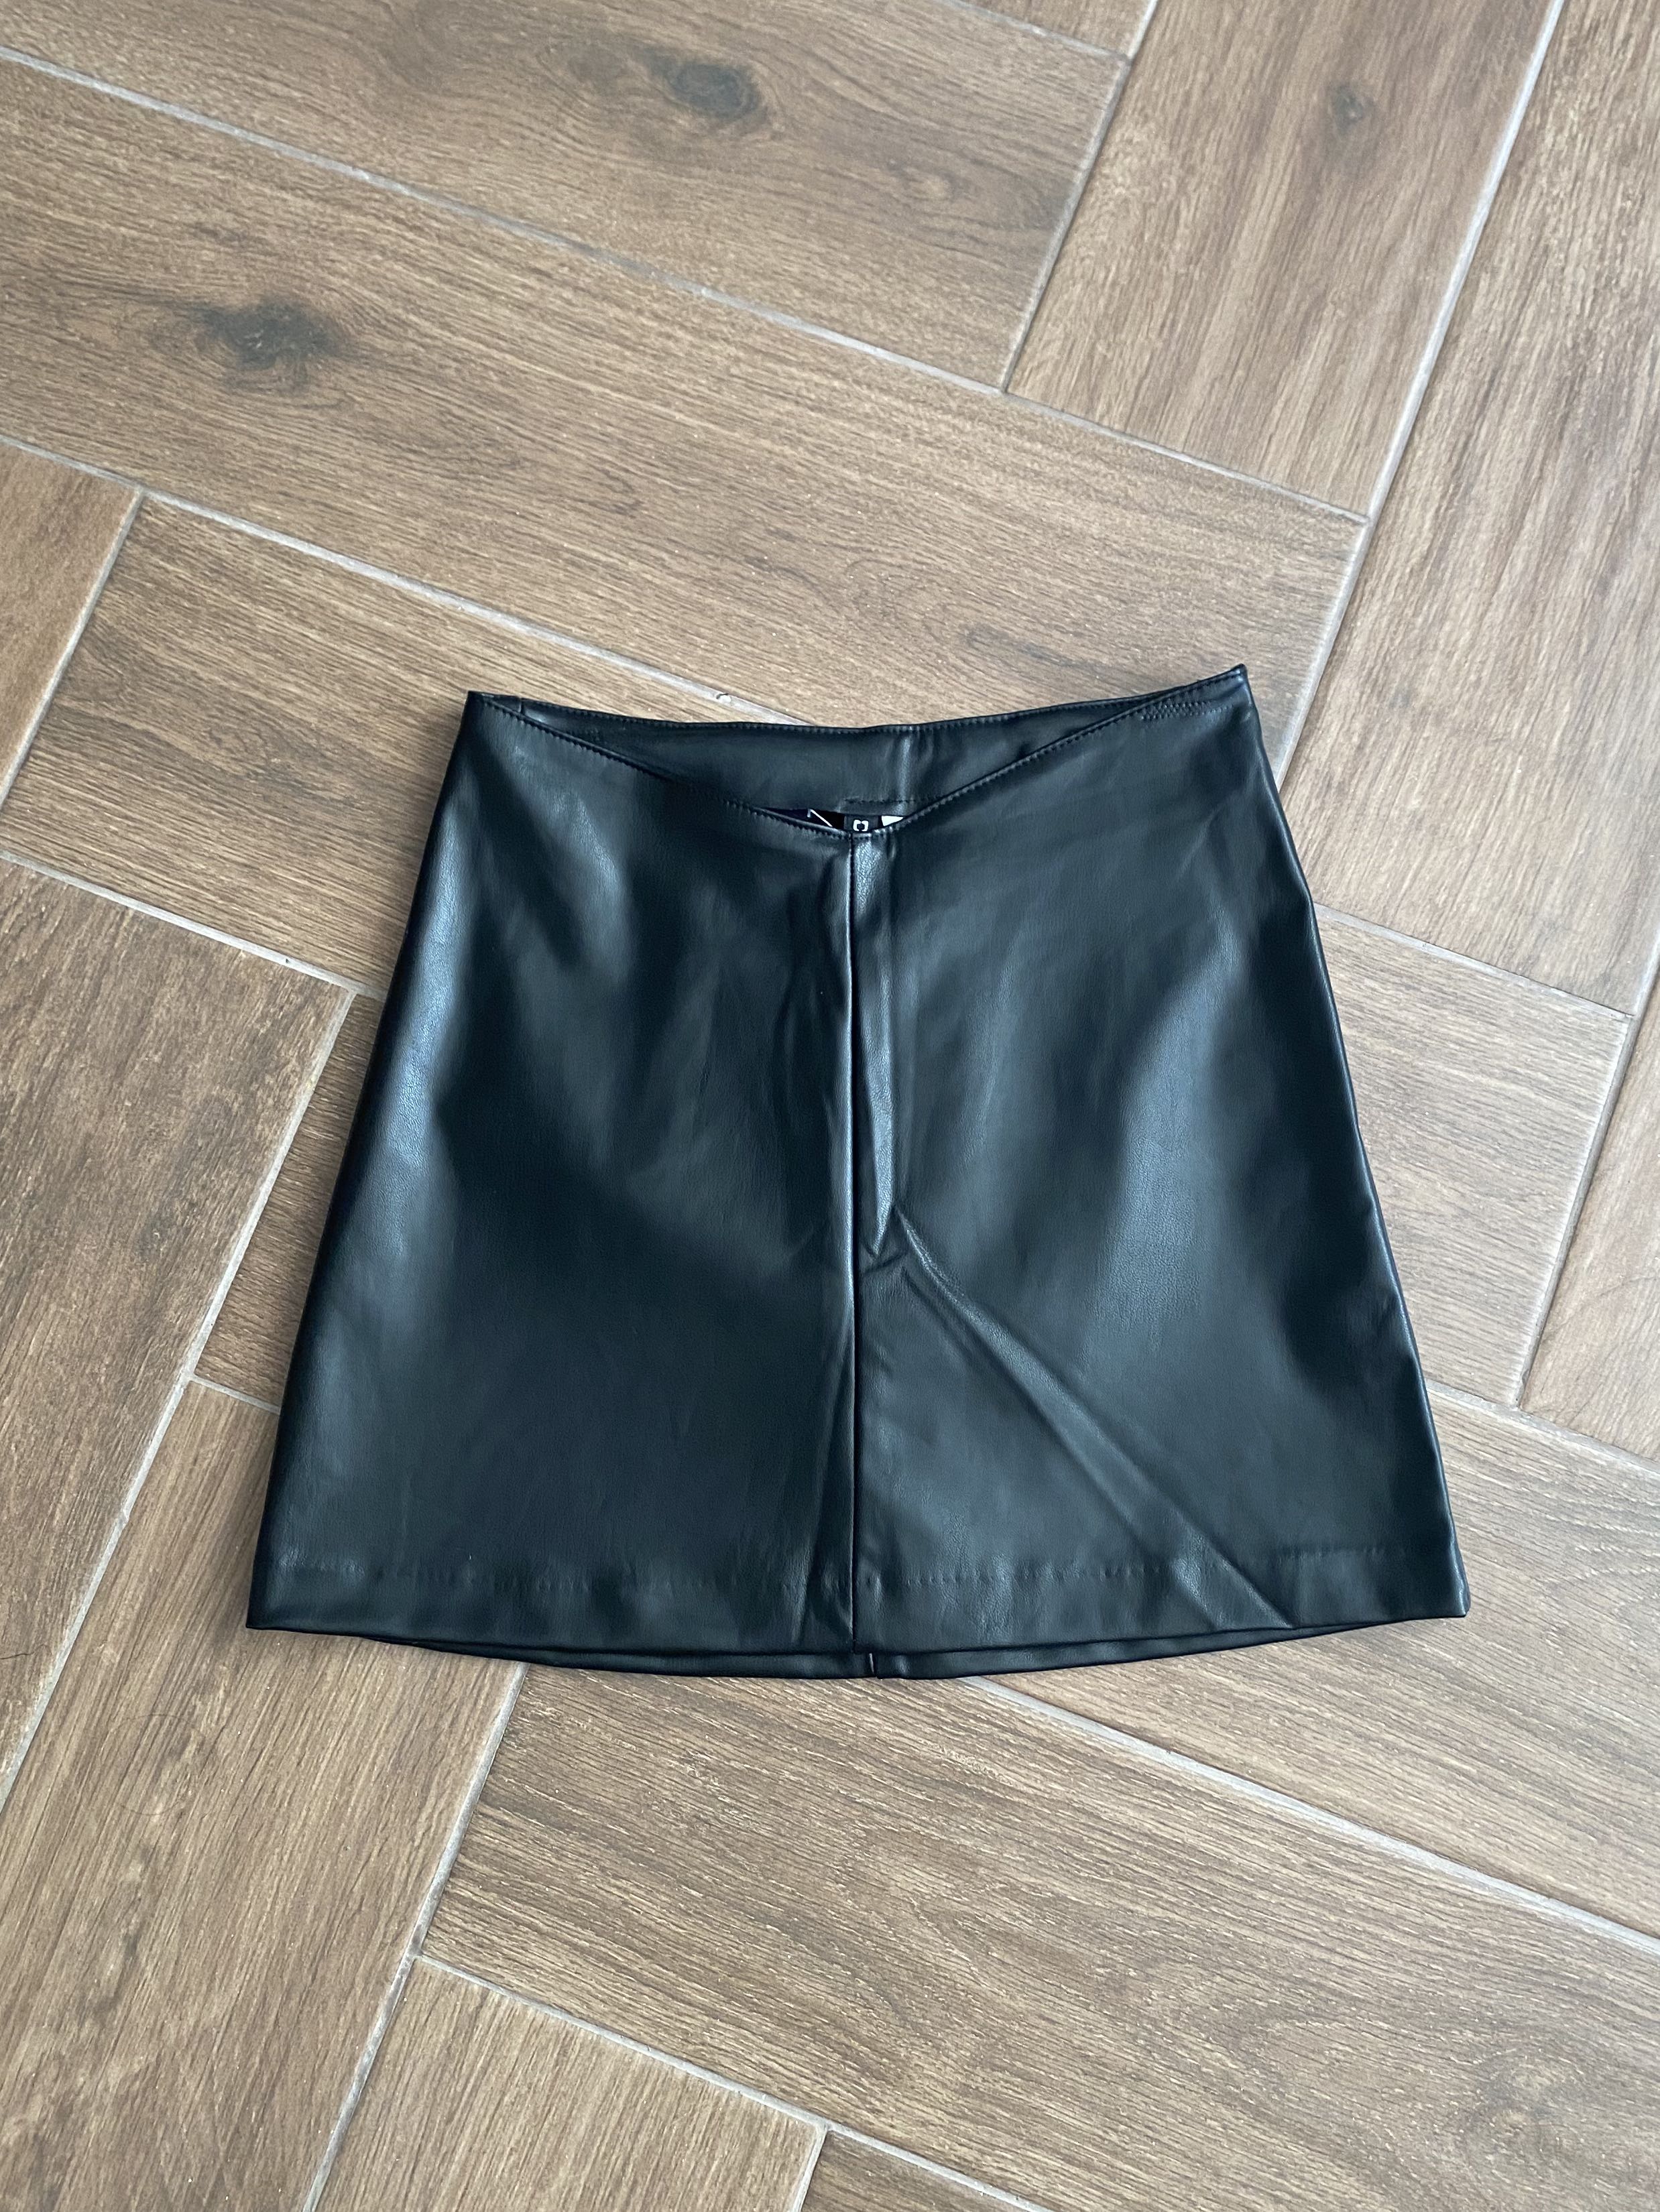 H&M leather skirt, Women's Fashion, Bottoms, Skirts on Carousell